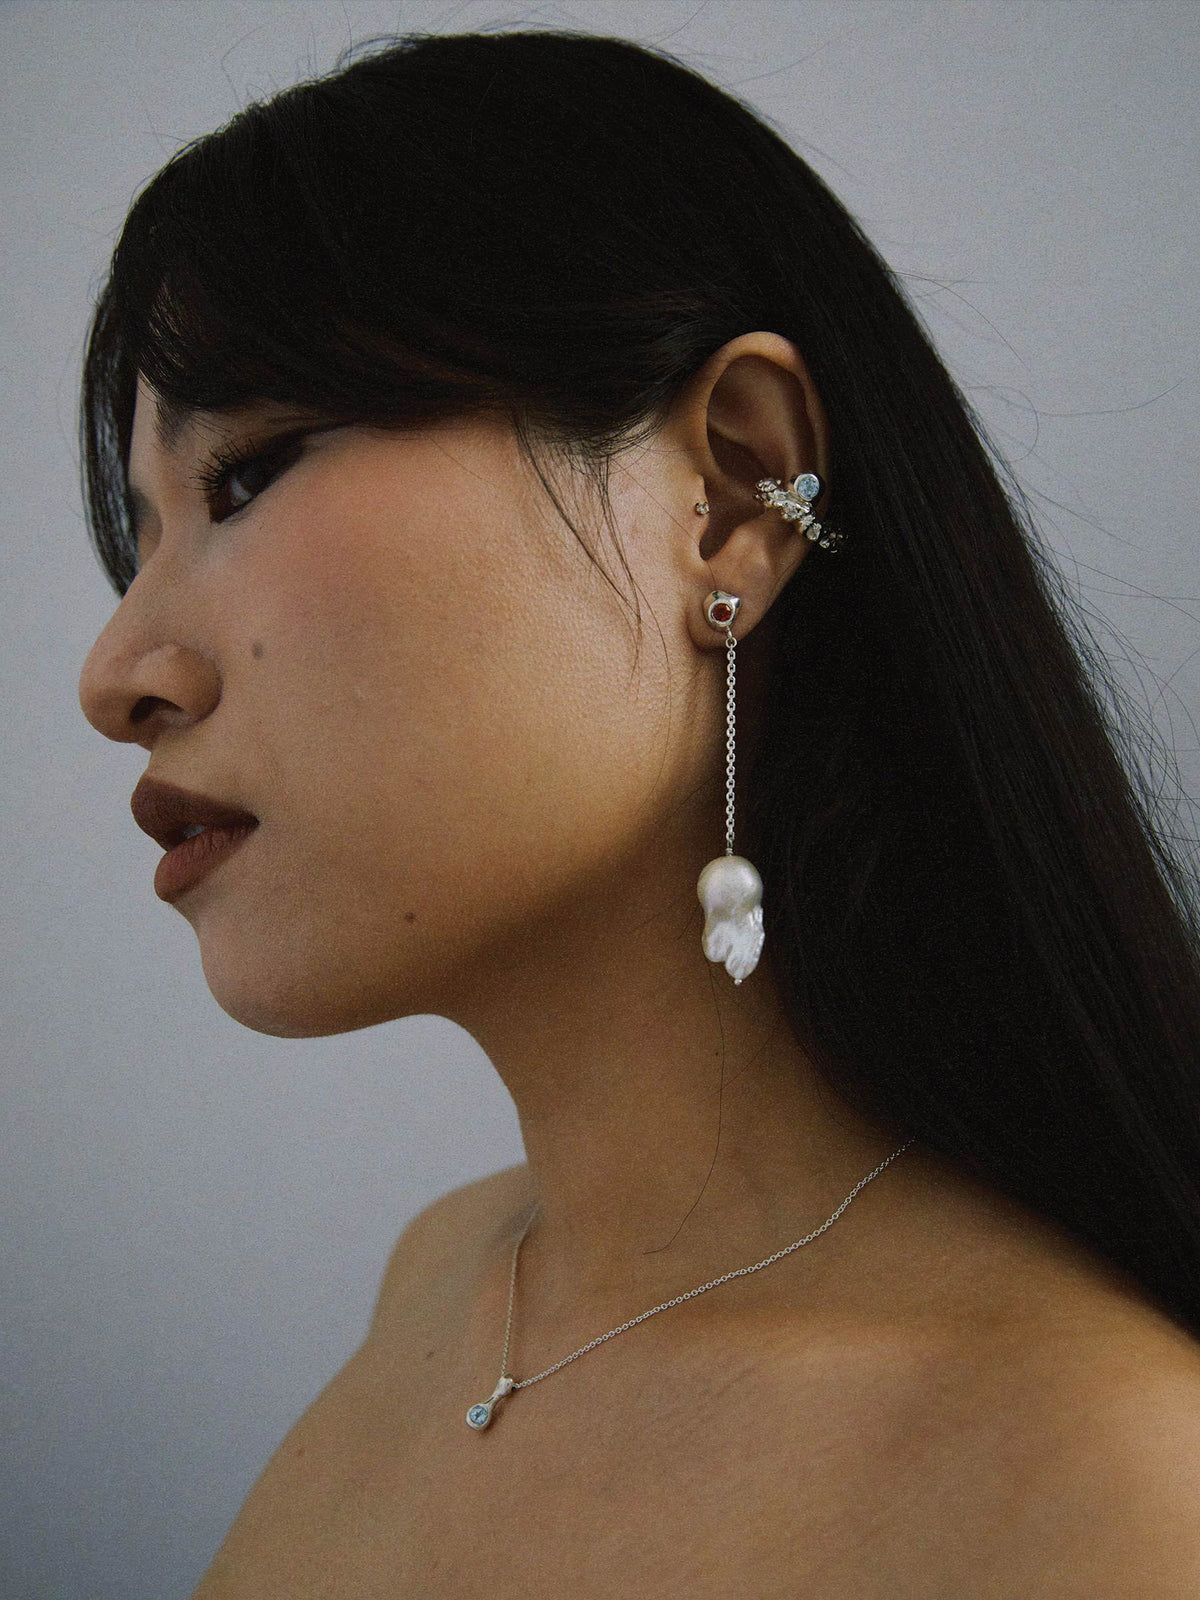 FARIS VENUS Drops in sterling silver with lab-created orange sapphire shown on model. Styled with ROCA GEM Ear Cuff in sterling silver with topaz, and BOLITO Necklace in sterling silver with topaz. Long side of asymmetrical earring shown